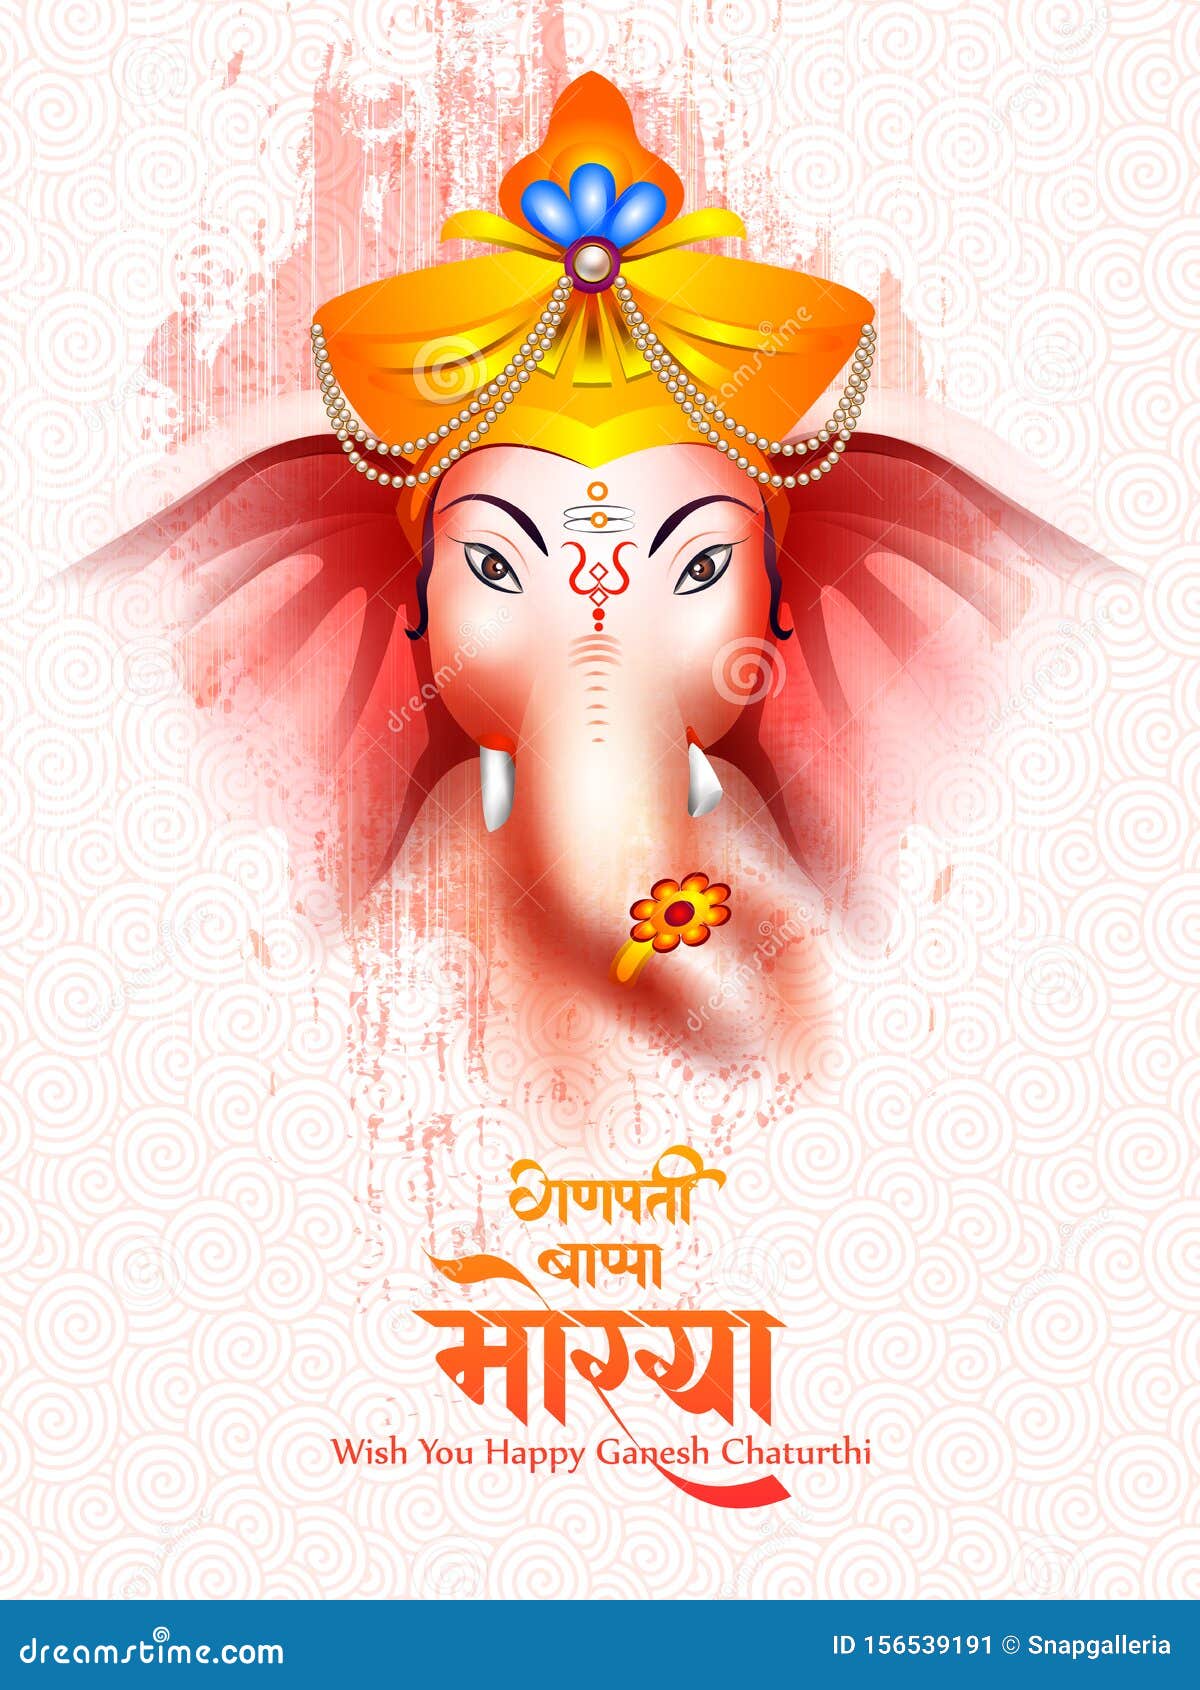 Lord Ganpati on Ganesh Chaturthi Background and Message in Hindi Meaning Oh  My Lord Ganesha Stock Vector - Illustration of ganapati, editable: 156539191